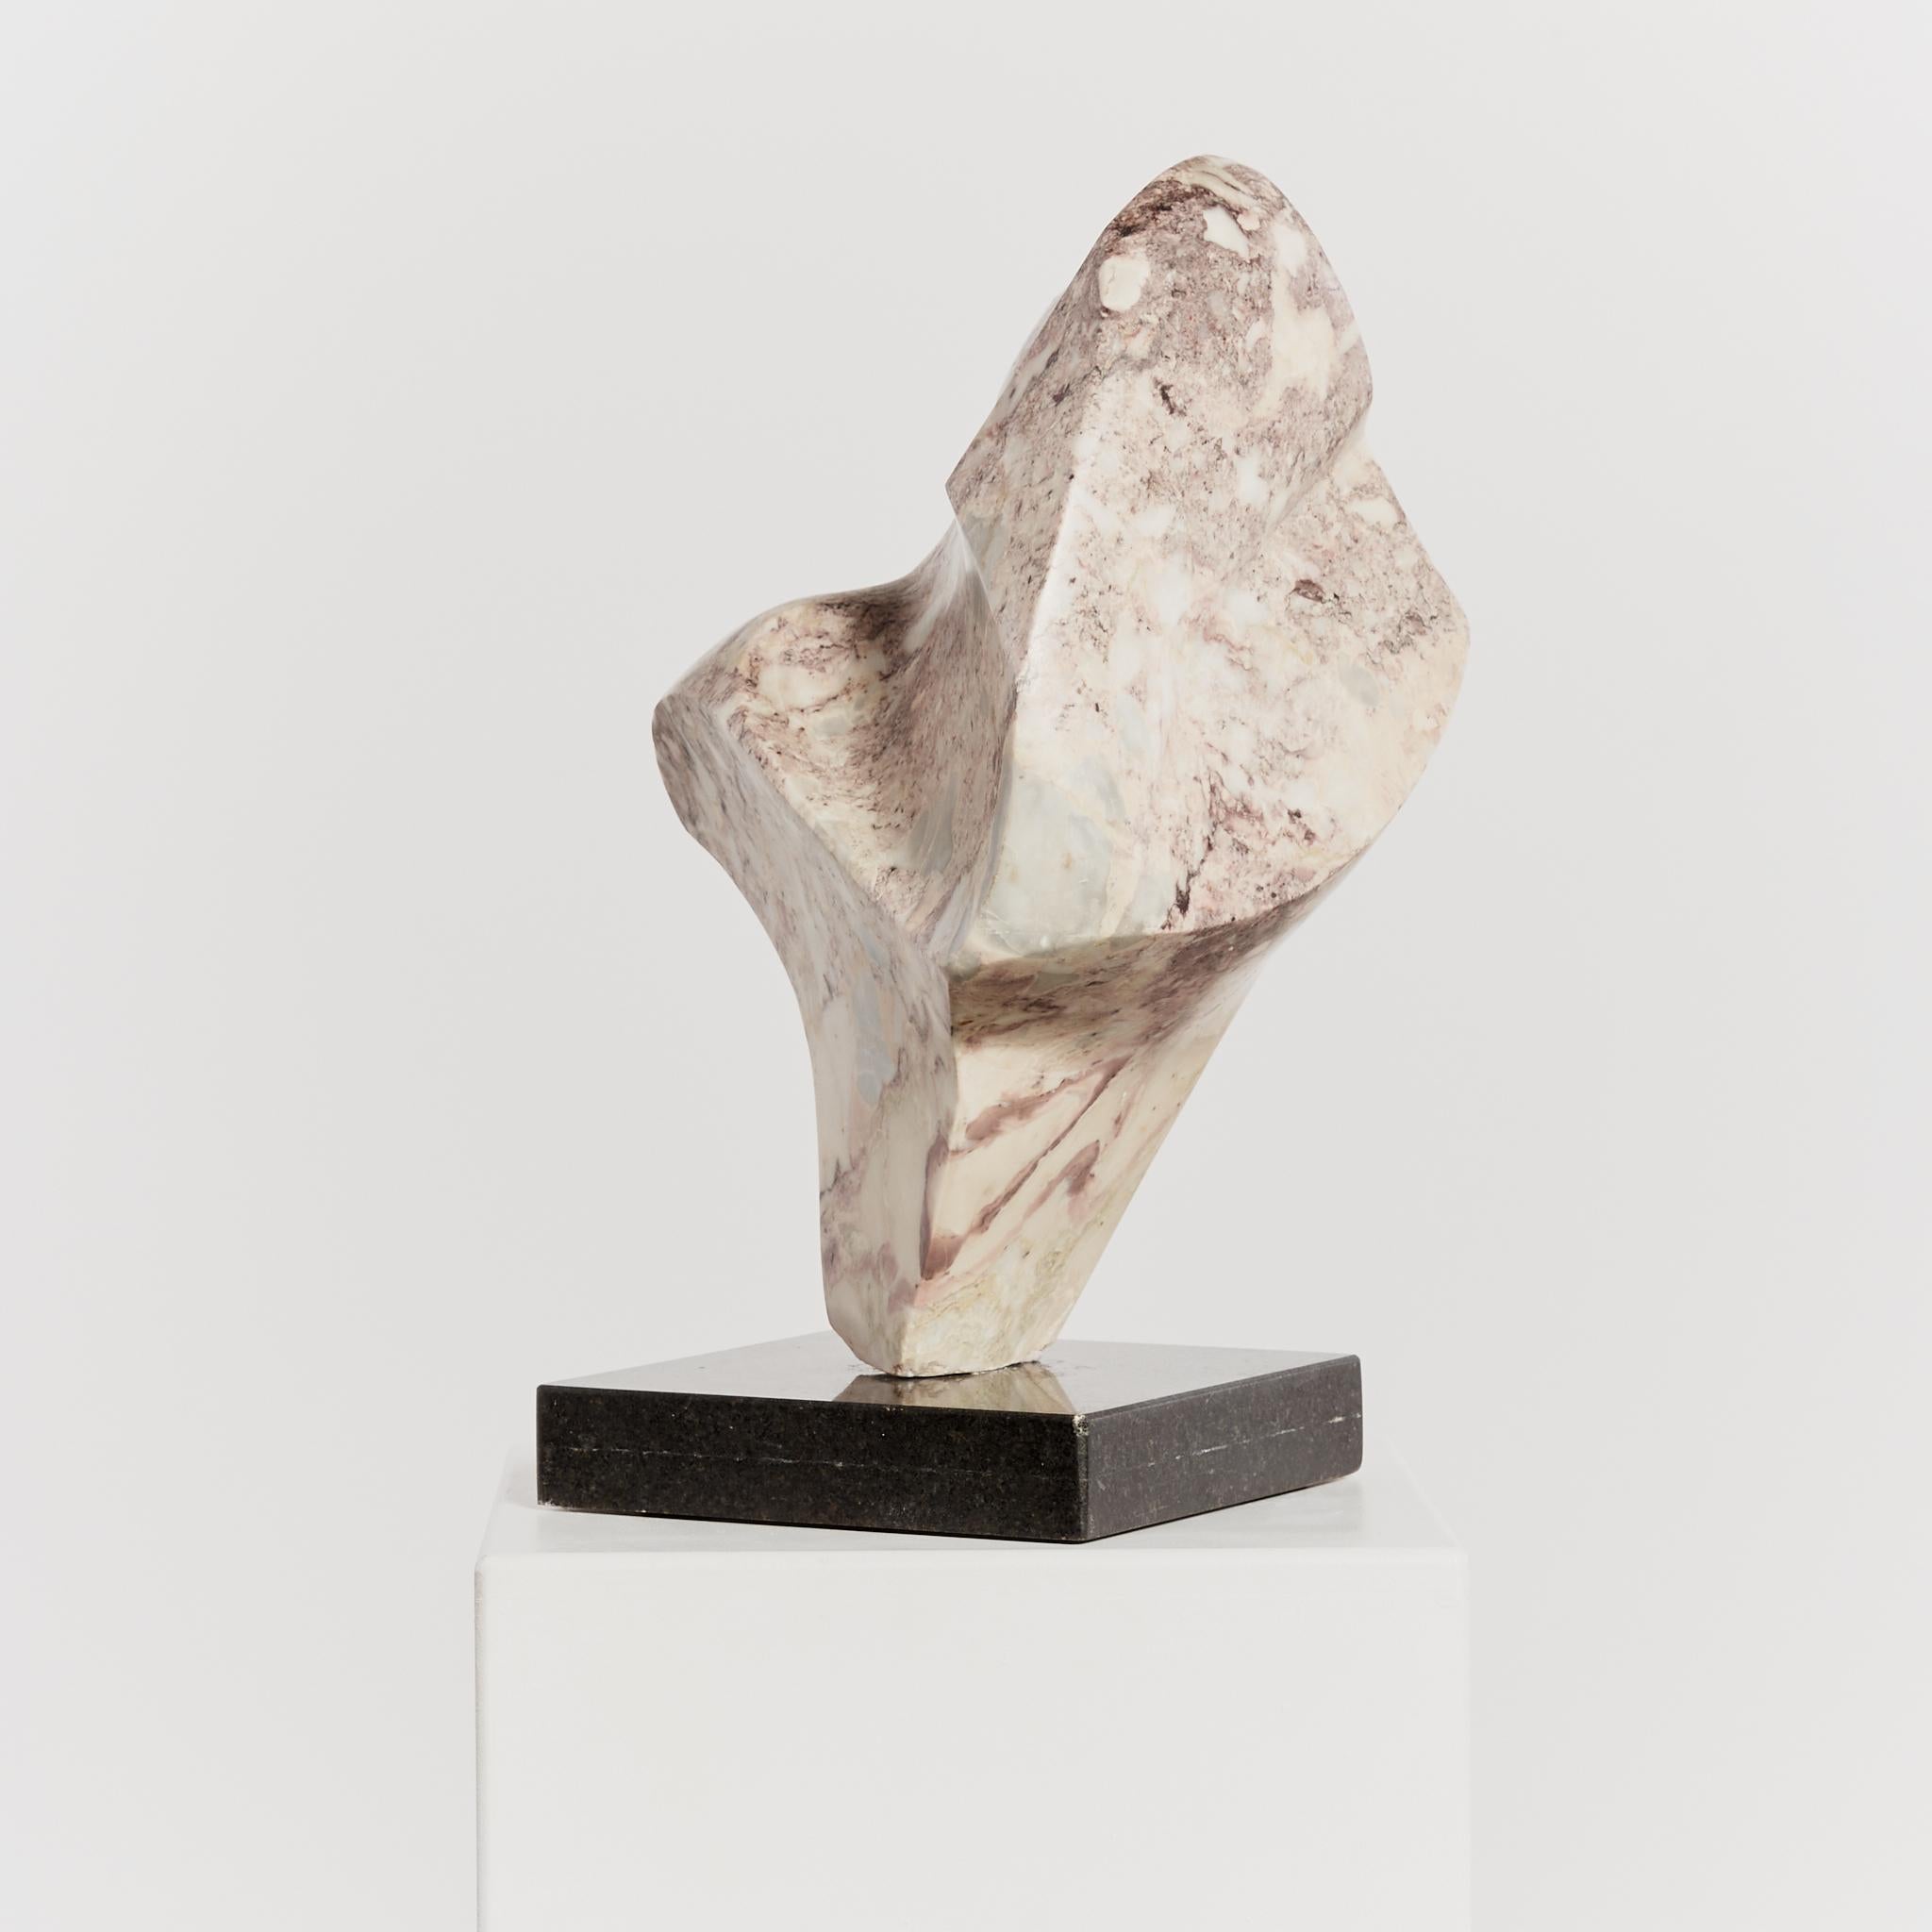 Large marble biomorphic sculpture with undulating form on granite plinth base, in the style of Tadeusz Koper.  A substantial and weighty piece. 

Period: Circa 1970's

Material: Marble, granite

Dimensions: H51cm, base approximately L25 x